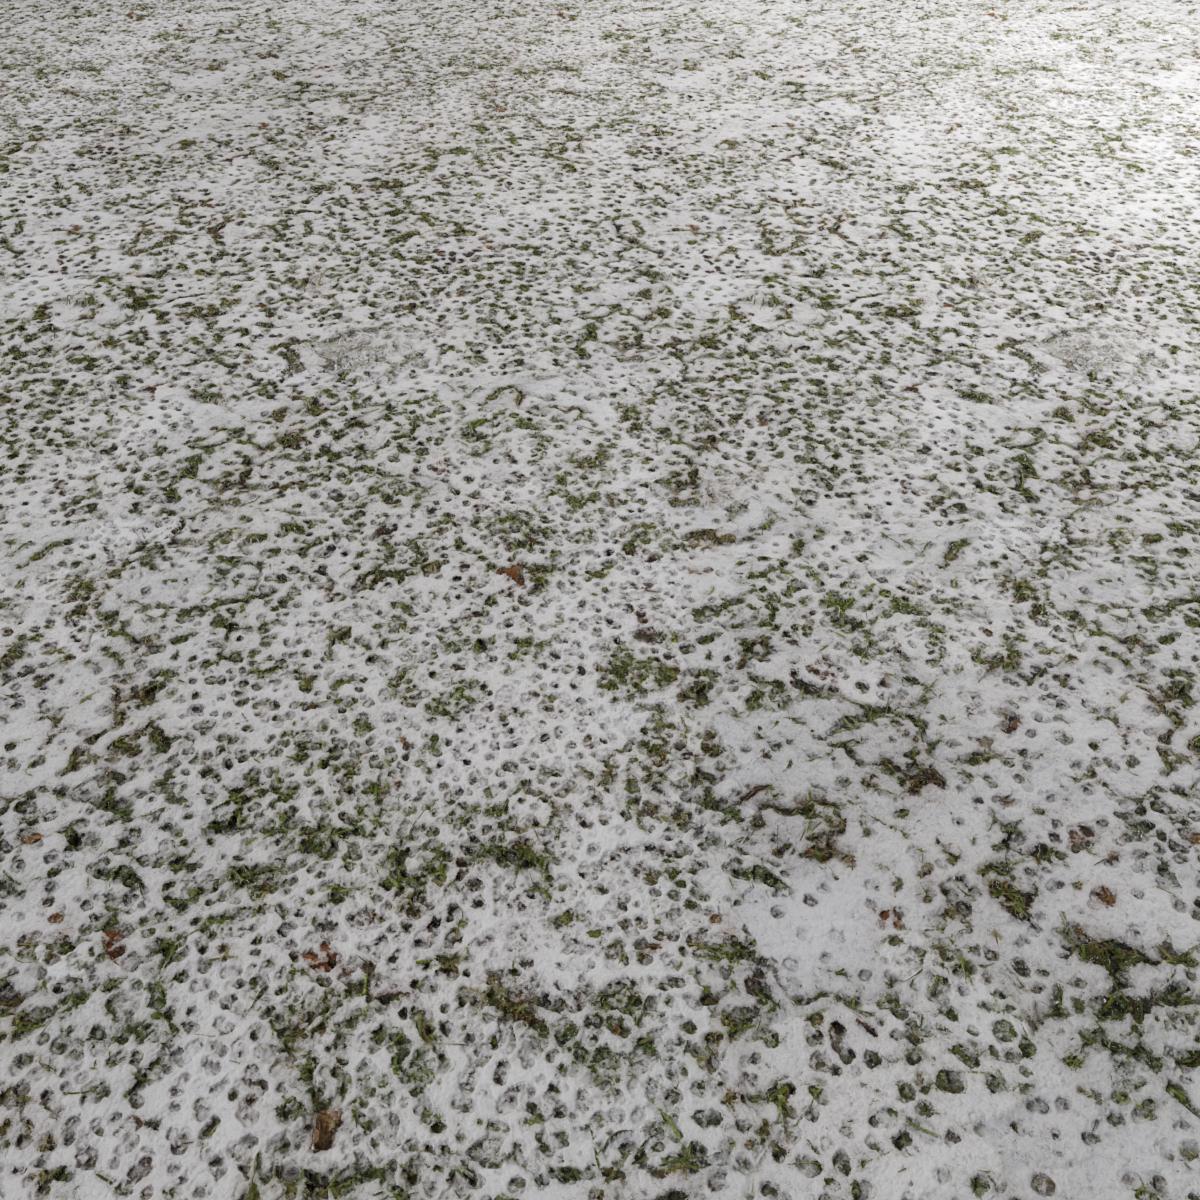 GRASS-WITH-SNOW